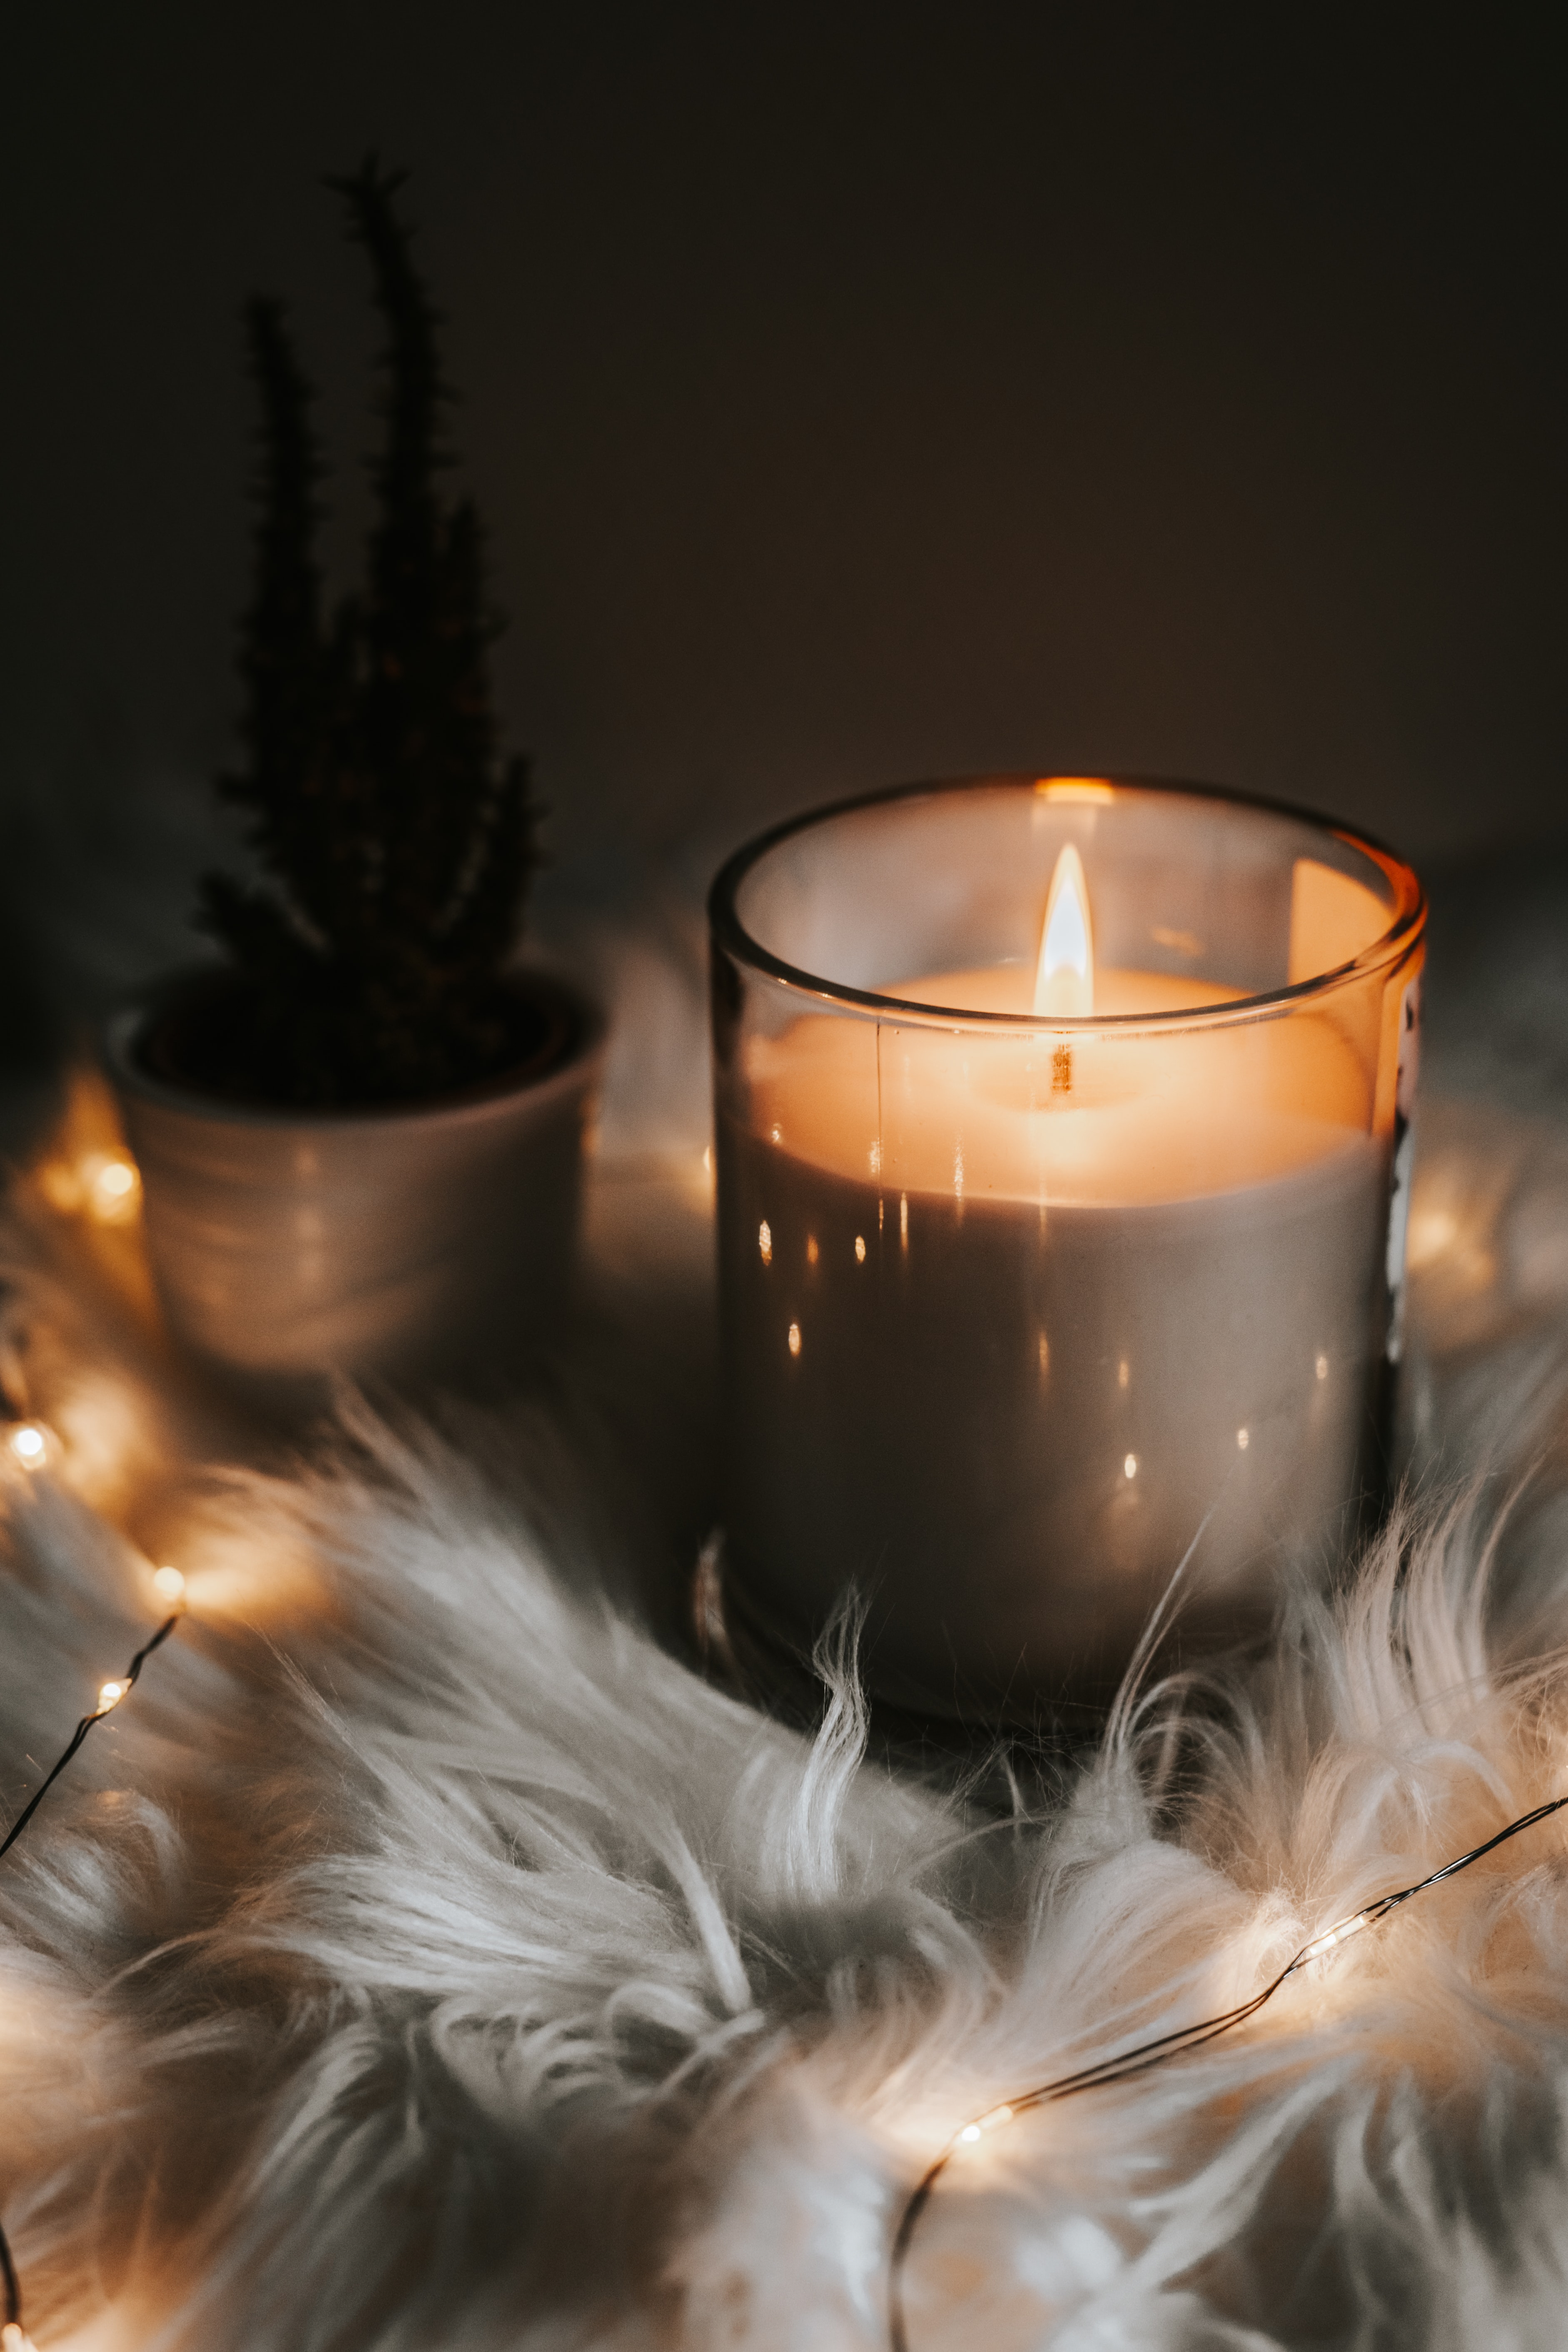 Candle miscellaneous, coziness, fire, garland 8k Backgrounds